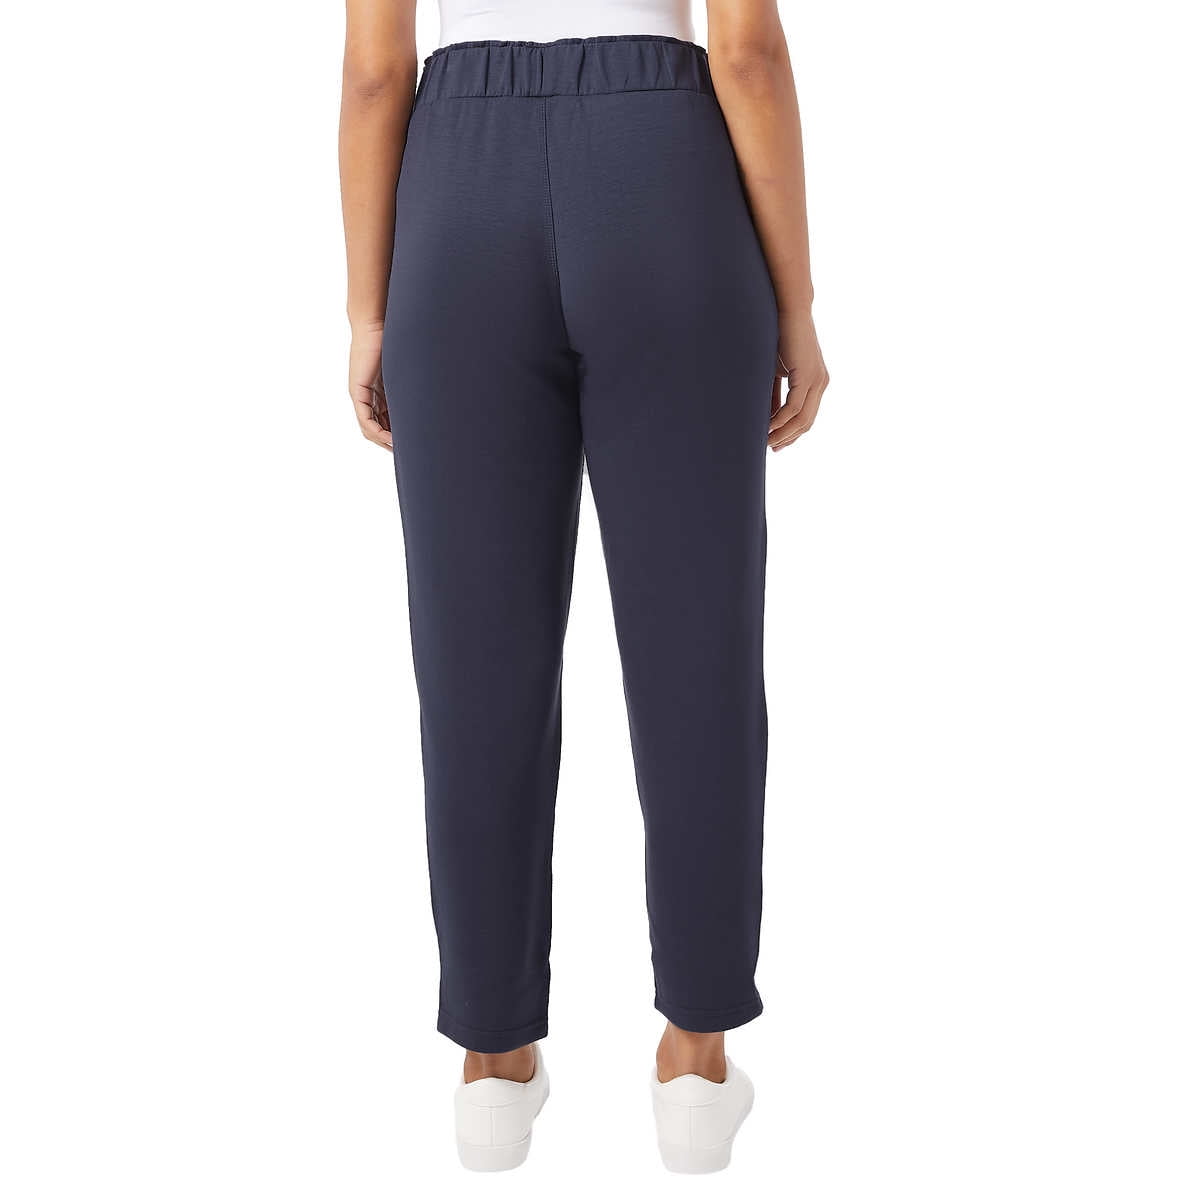 32 Degrees, Pants & Jumpsuits, 32degrees Cool Crop Pull On Pants New  Elastic Tie Waist Pockets Stretchy Women L